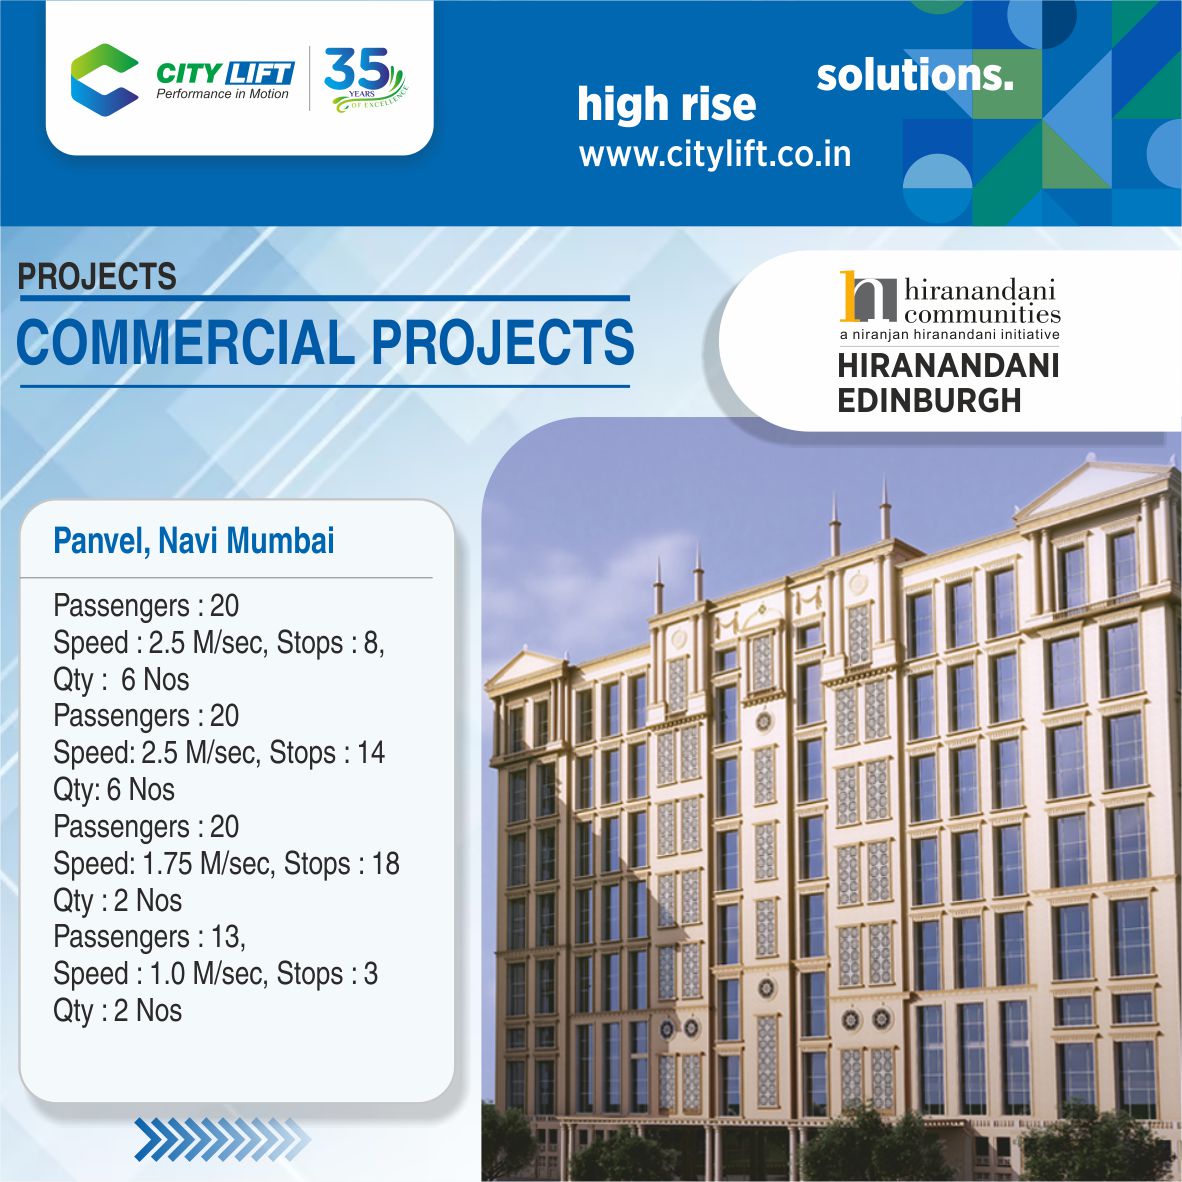 COMMERCIAL PROJECTS